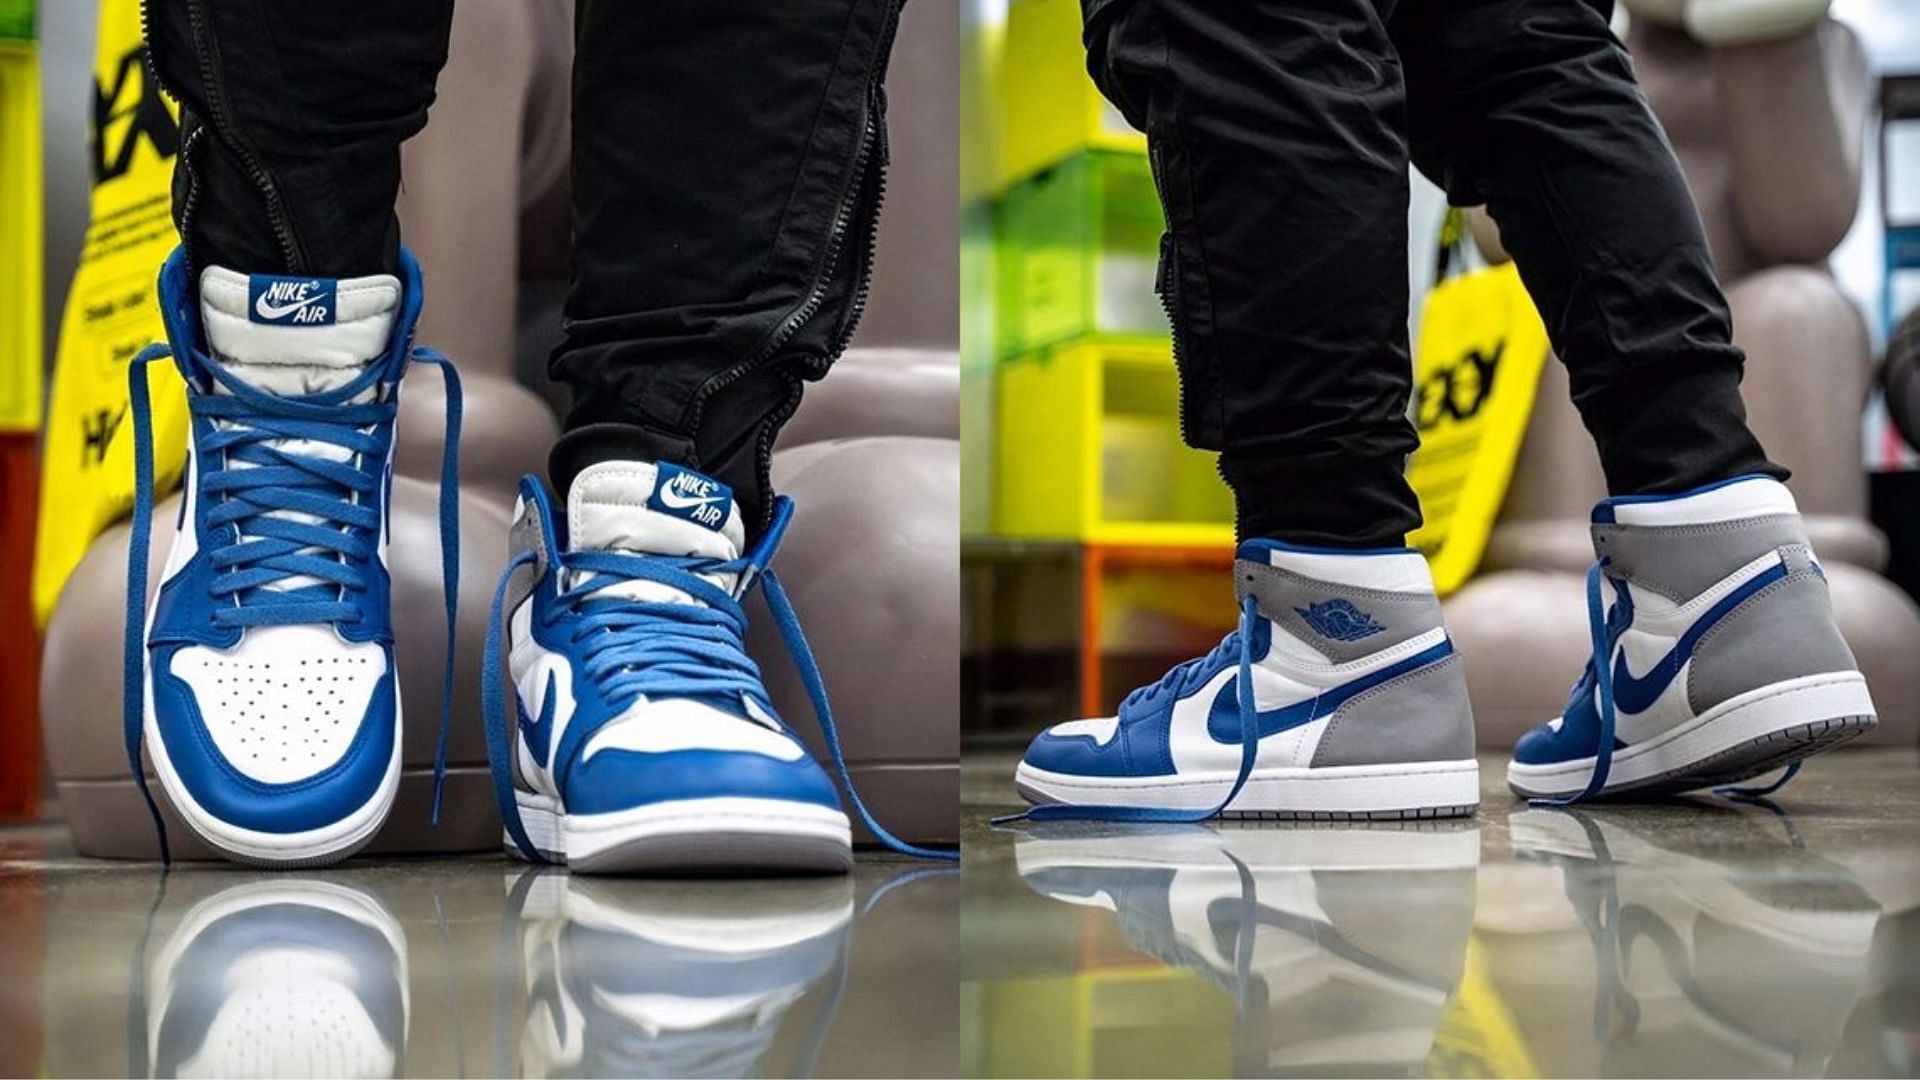 Where to buy Air Jordan 1 “True Blue” shoes? Price, release date